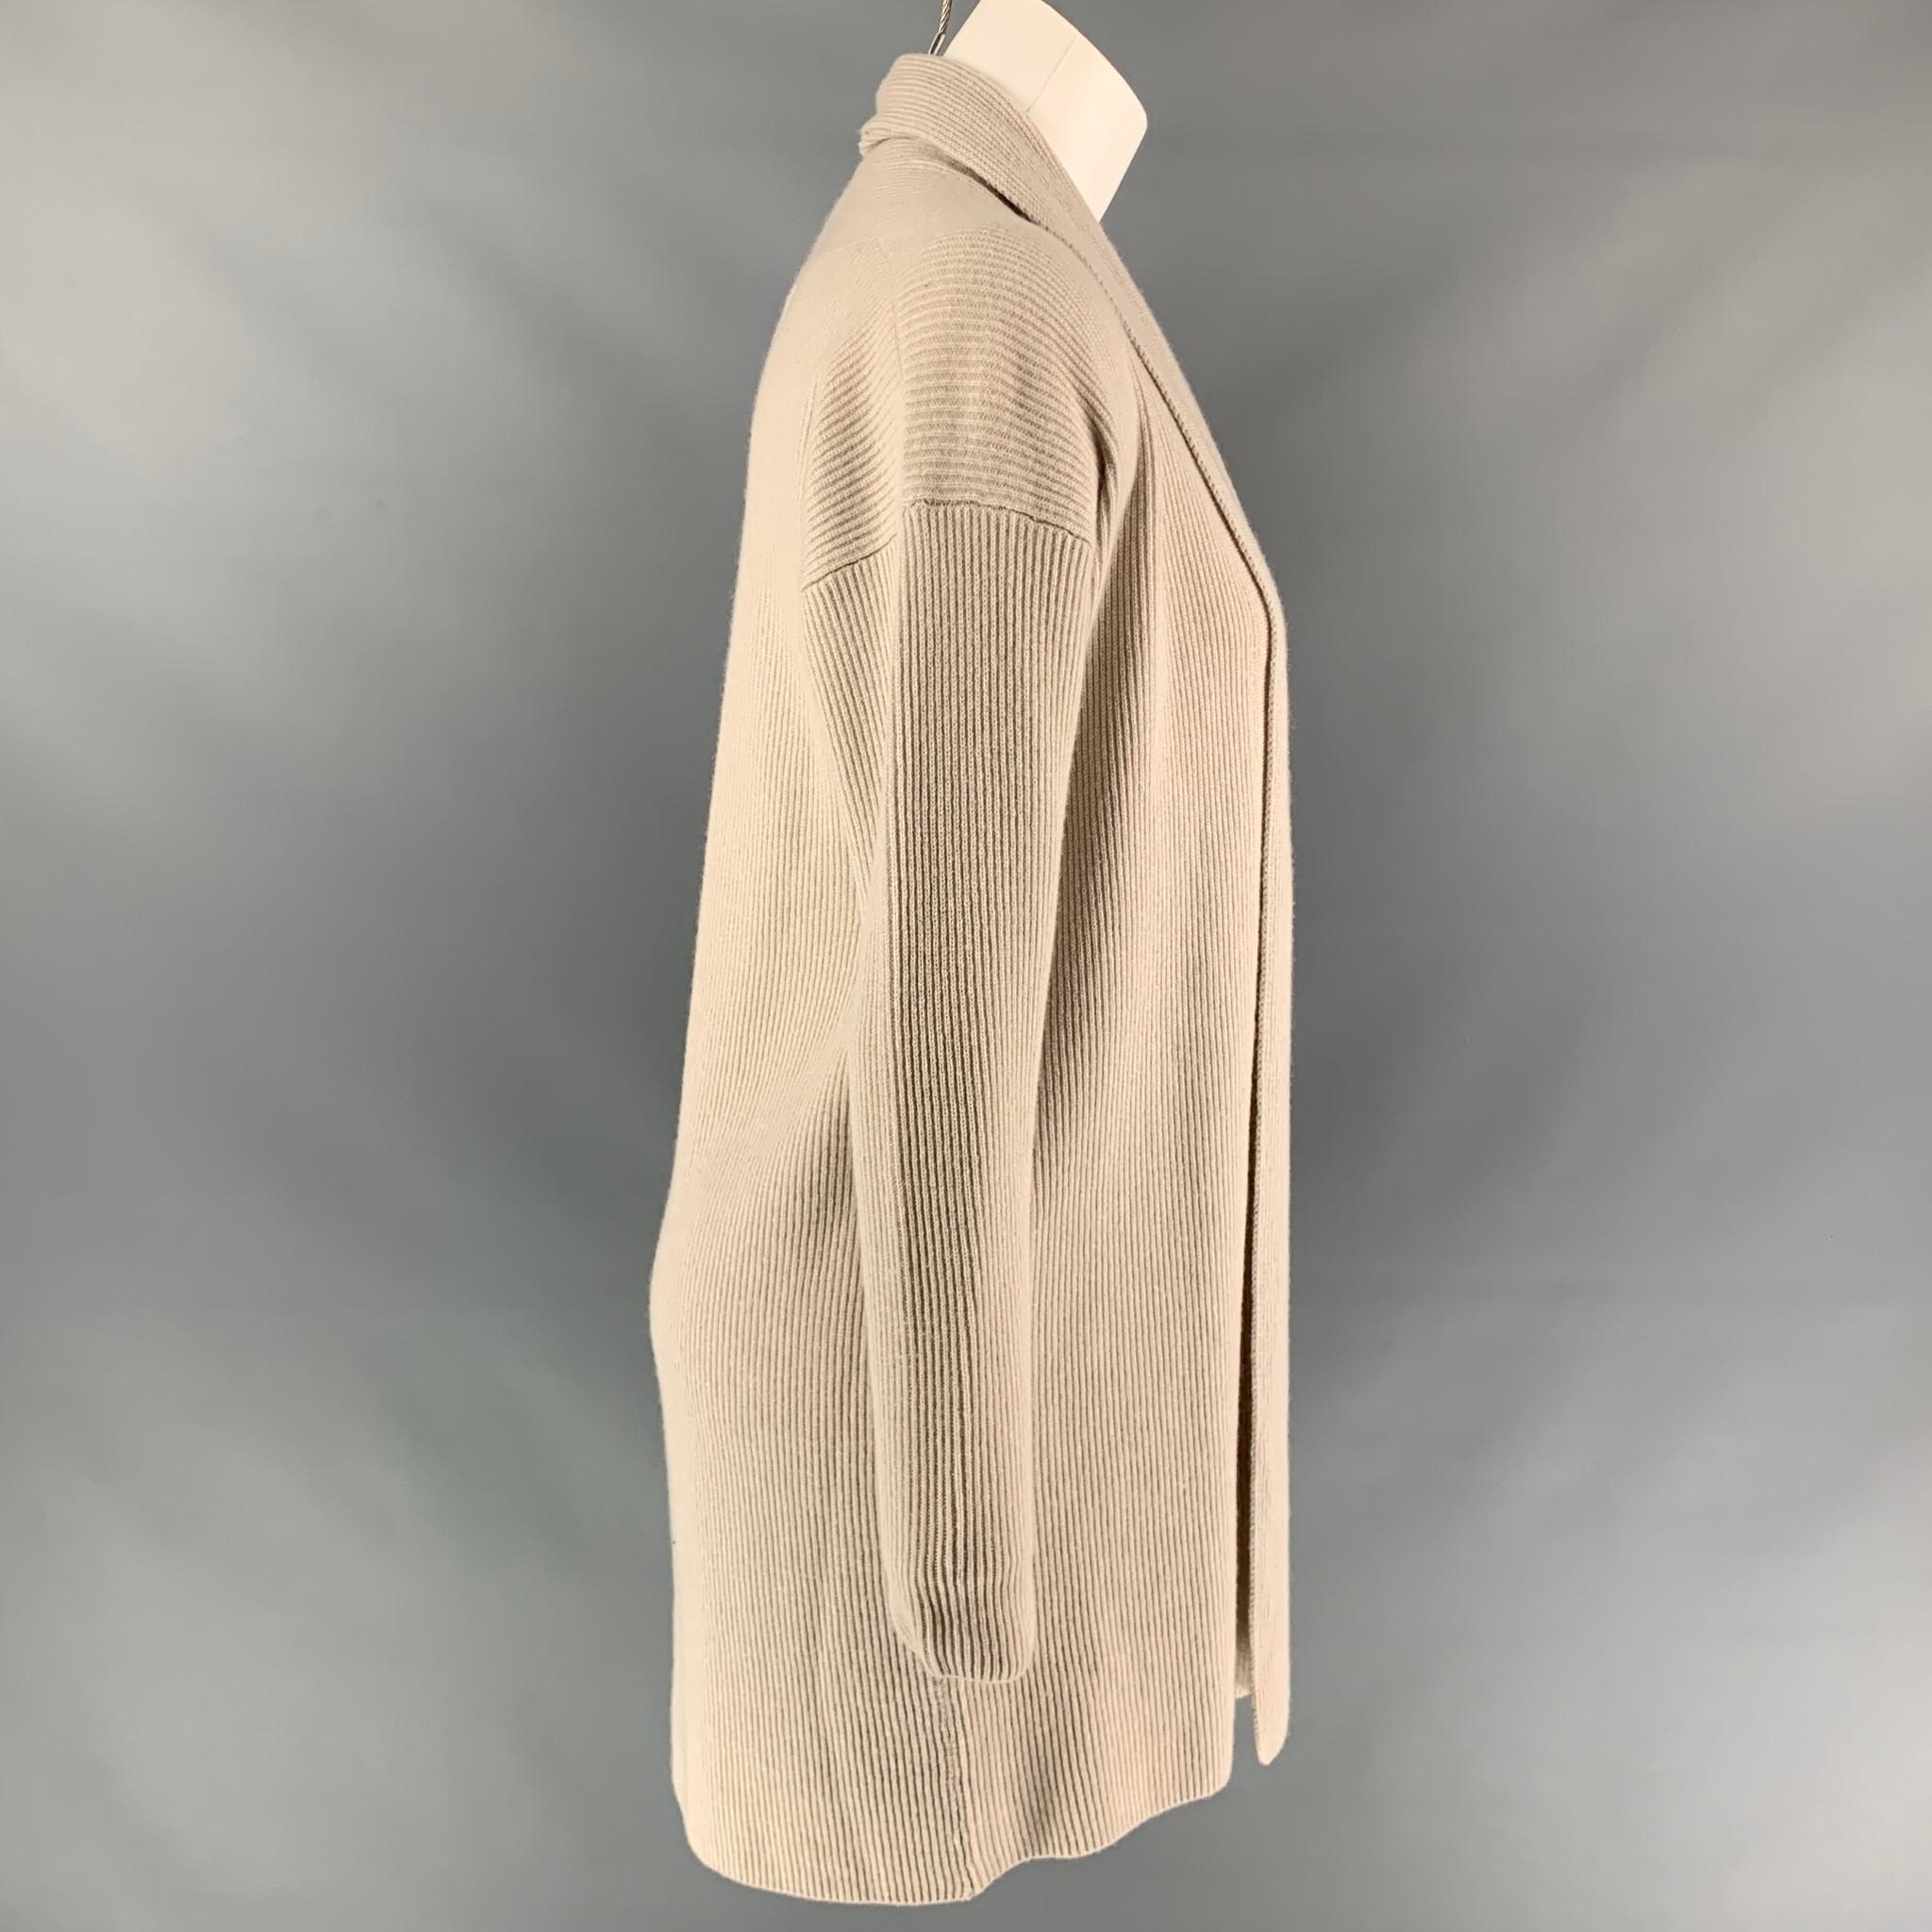 FALCONERI cardigan comes in a oatmeal ribbed cashmere featuring a shawl collar and a open front. Made in Italy.

Very Good Pre-Owned Condition.
Marked: S
Original Retail Price: $470.00

Measurements:

Shoulder: 20 in.
Bust: 40 in.
Sleeve: 21